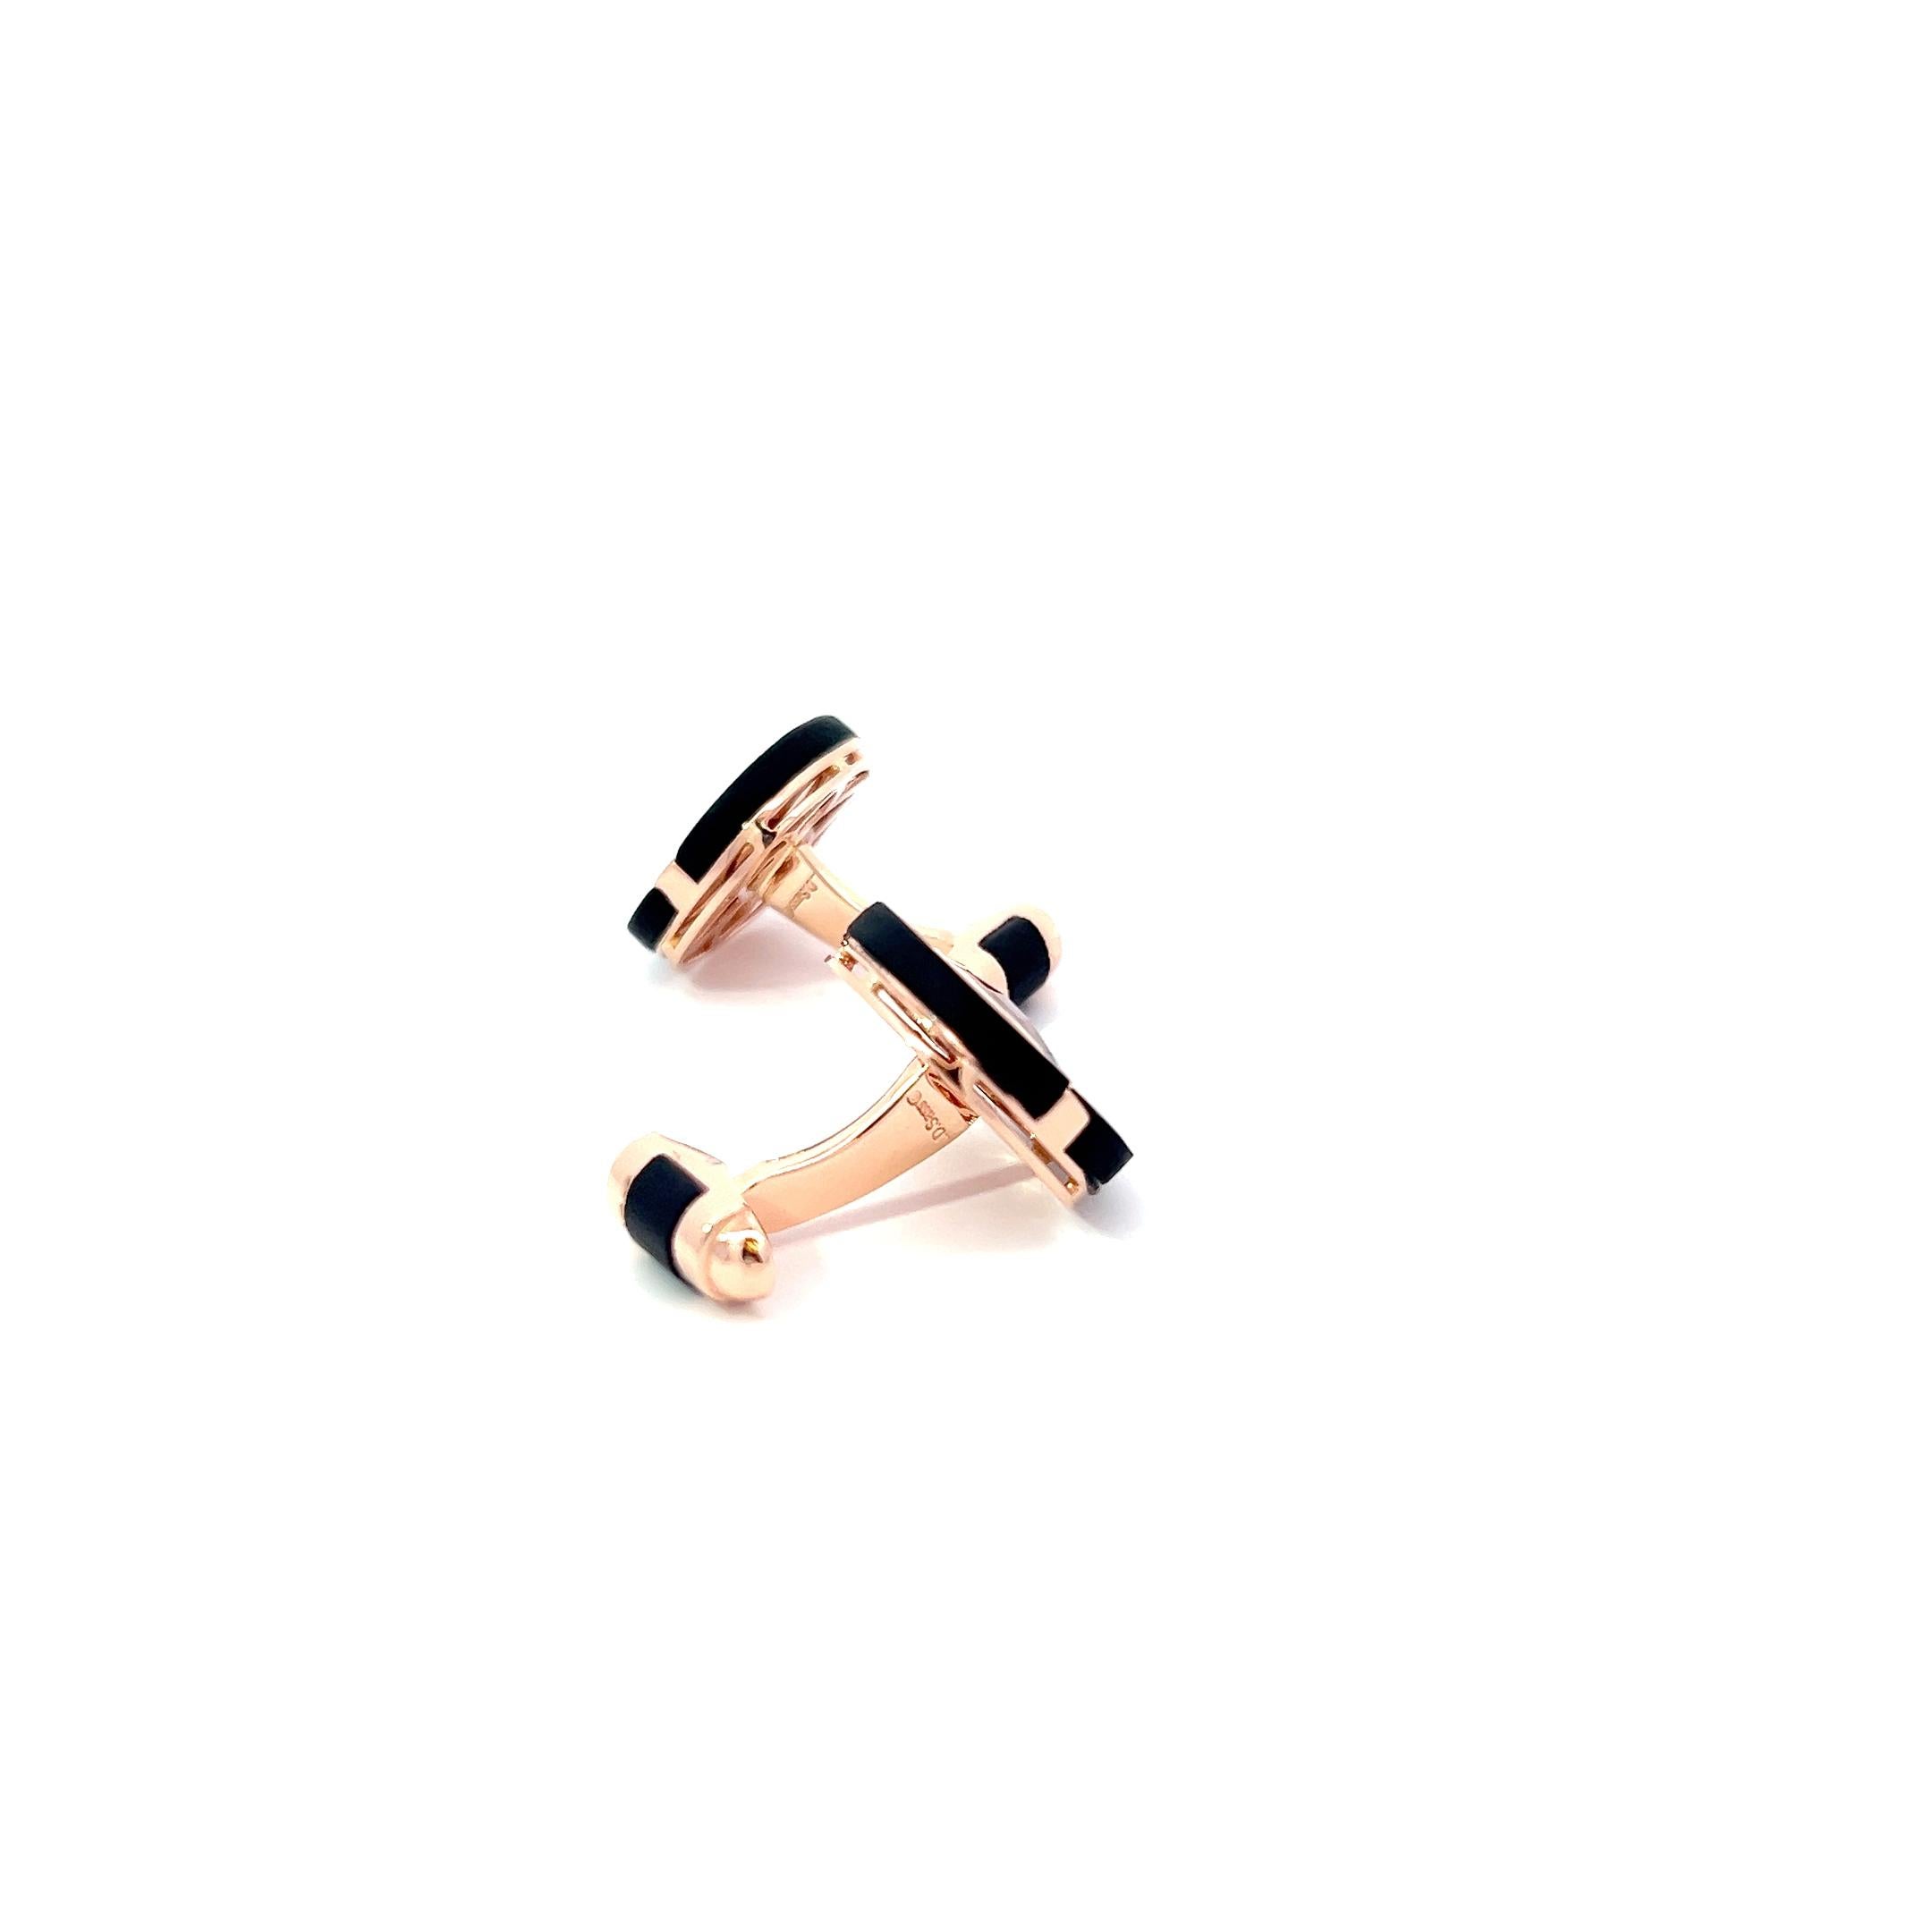 Introducing a luxurious statement piece for the discerning gentleman: these exquisite 18k rose gold cufflinks epitomize sophistication and refinement. Crafted with meticulous attention to detail, each cufflink features a captivating centerpiece of